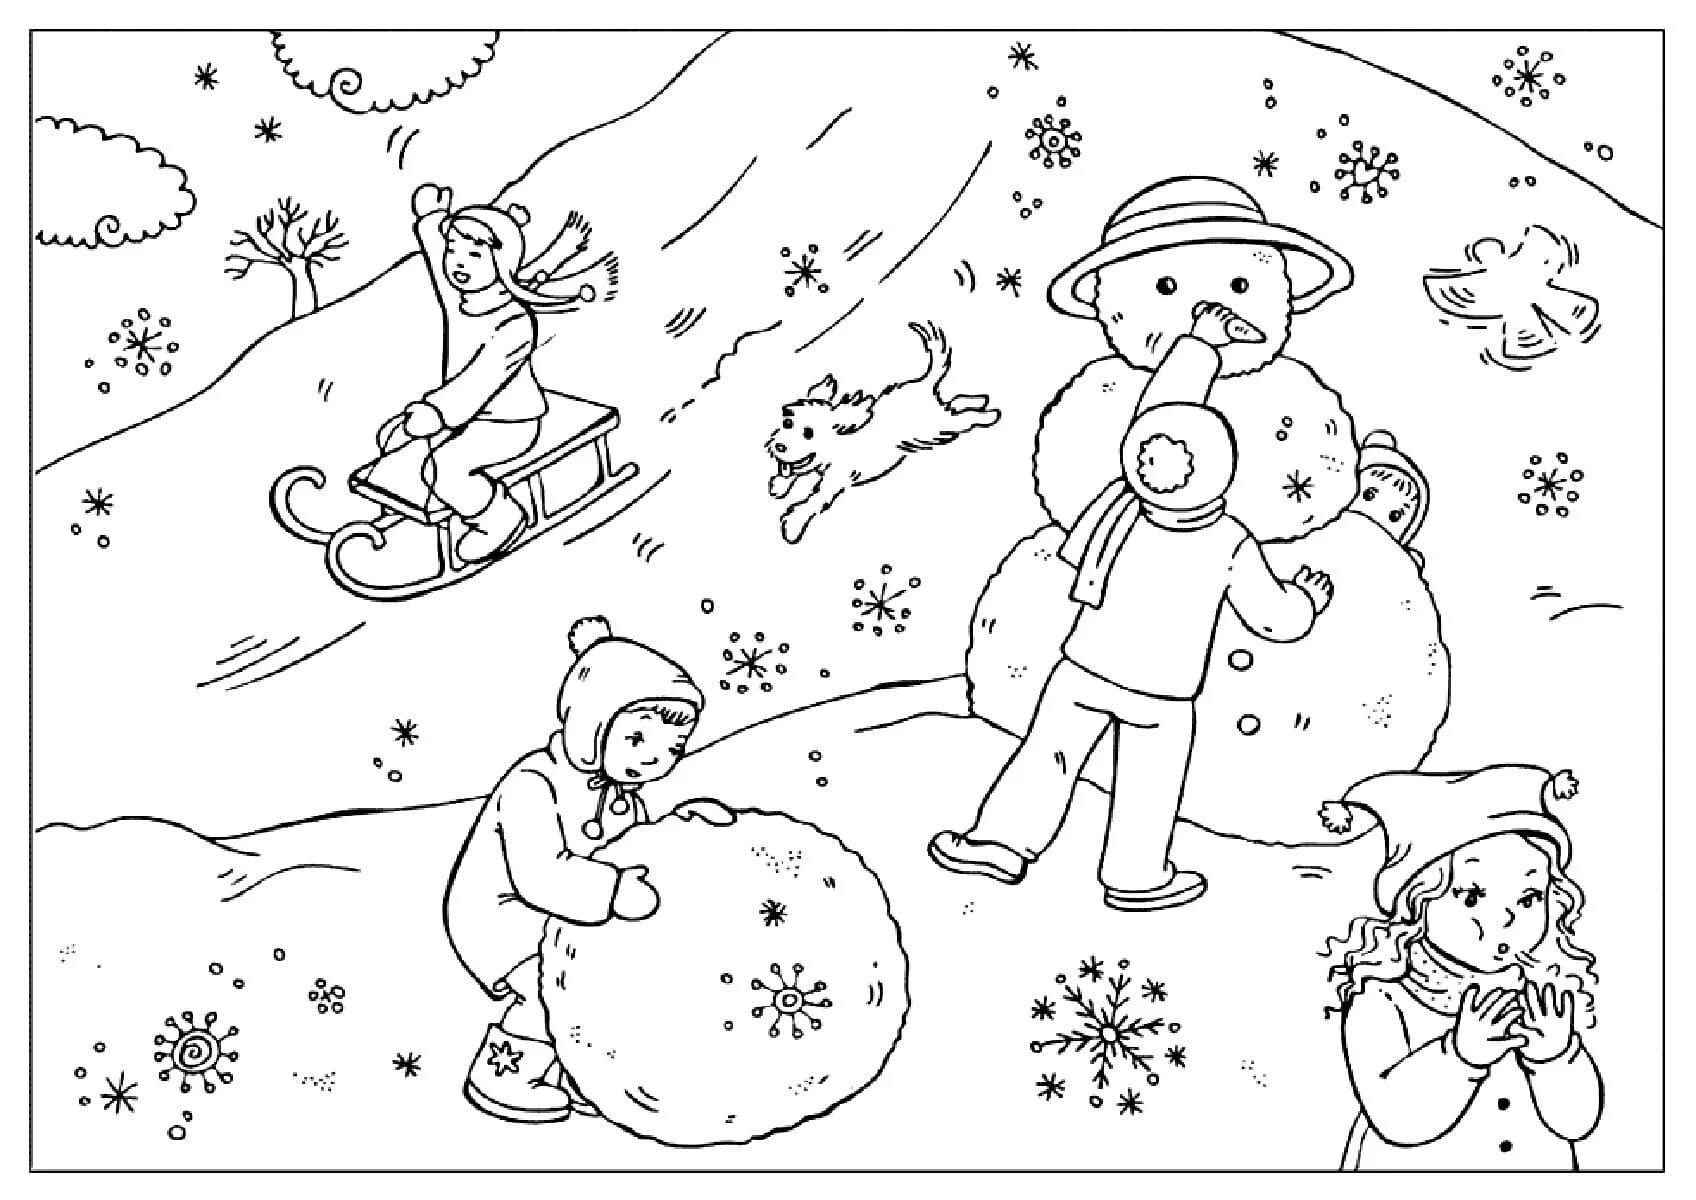 Drawing on winter theme #10